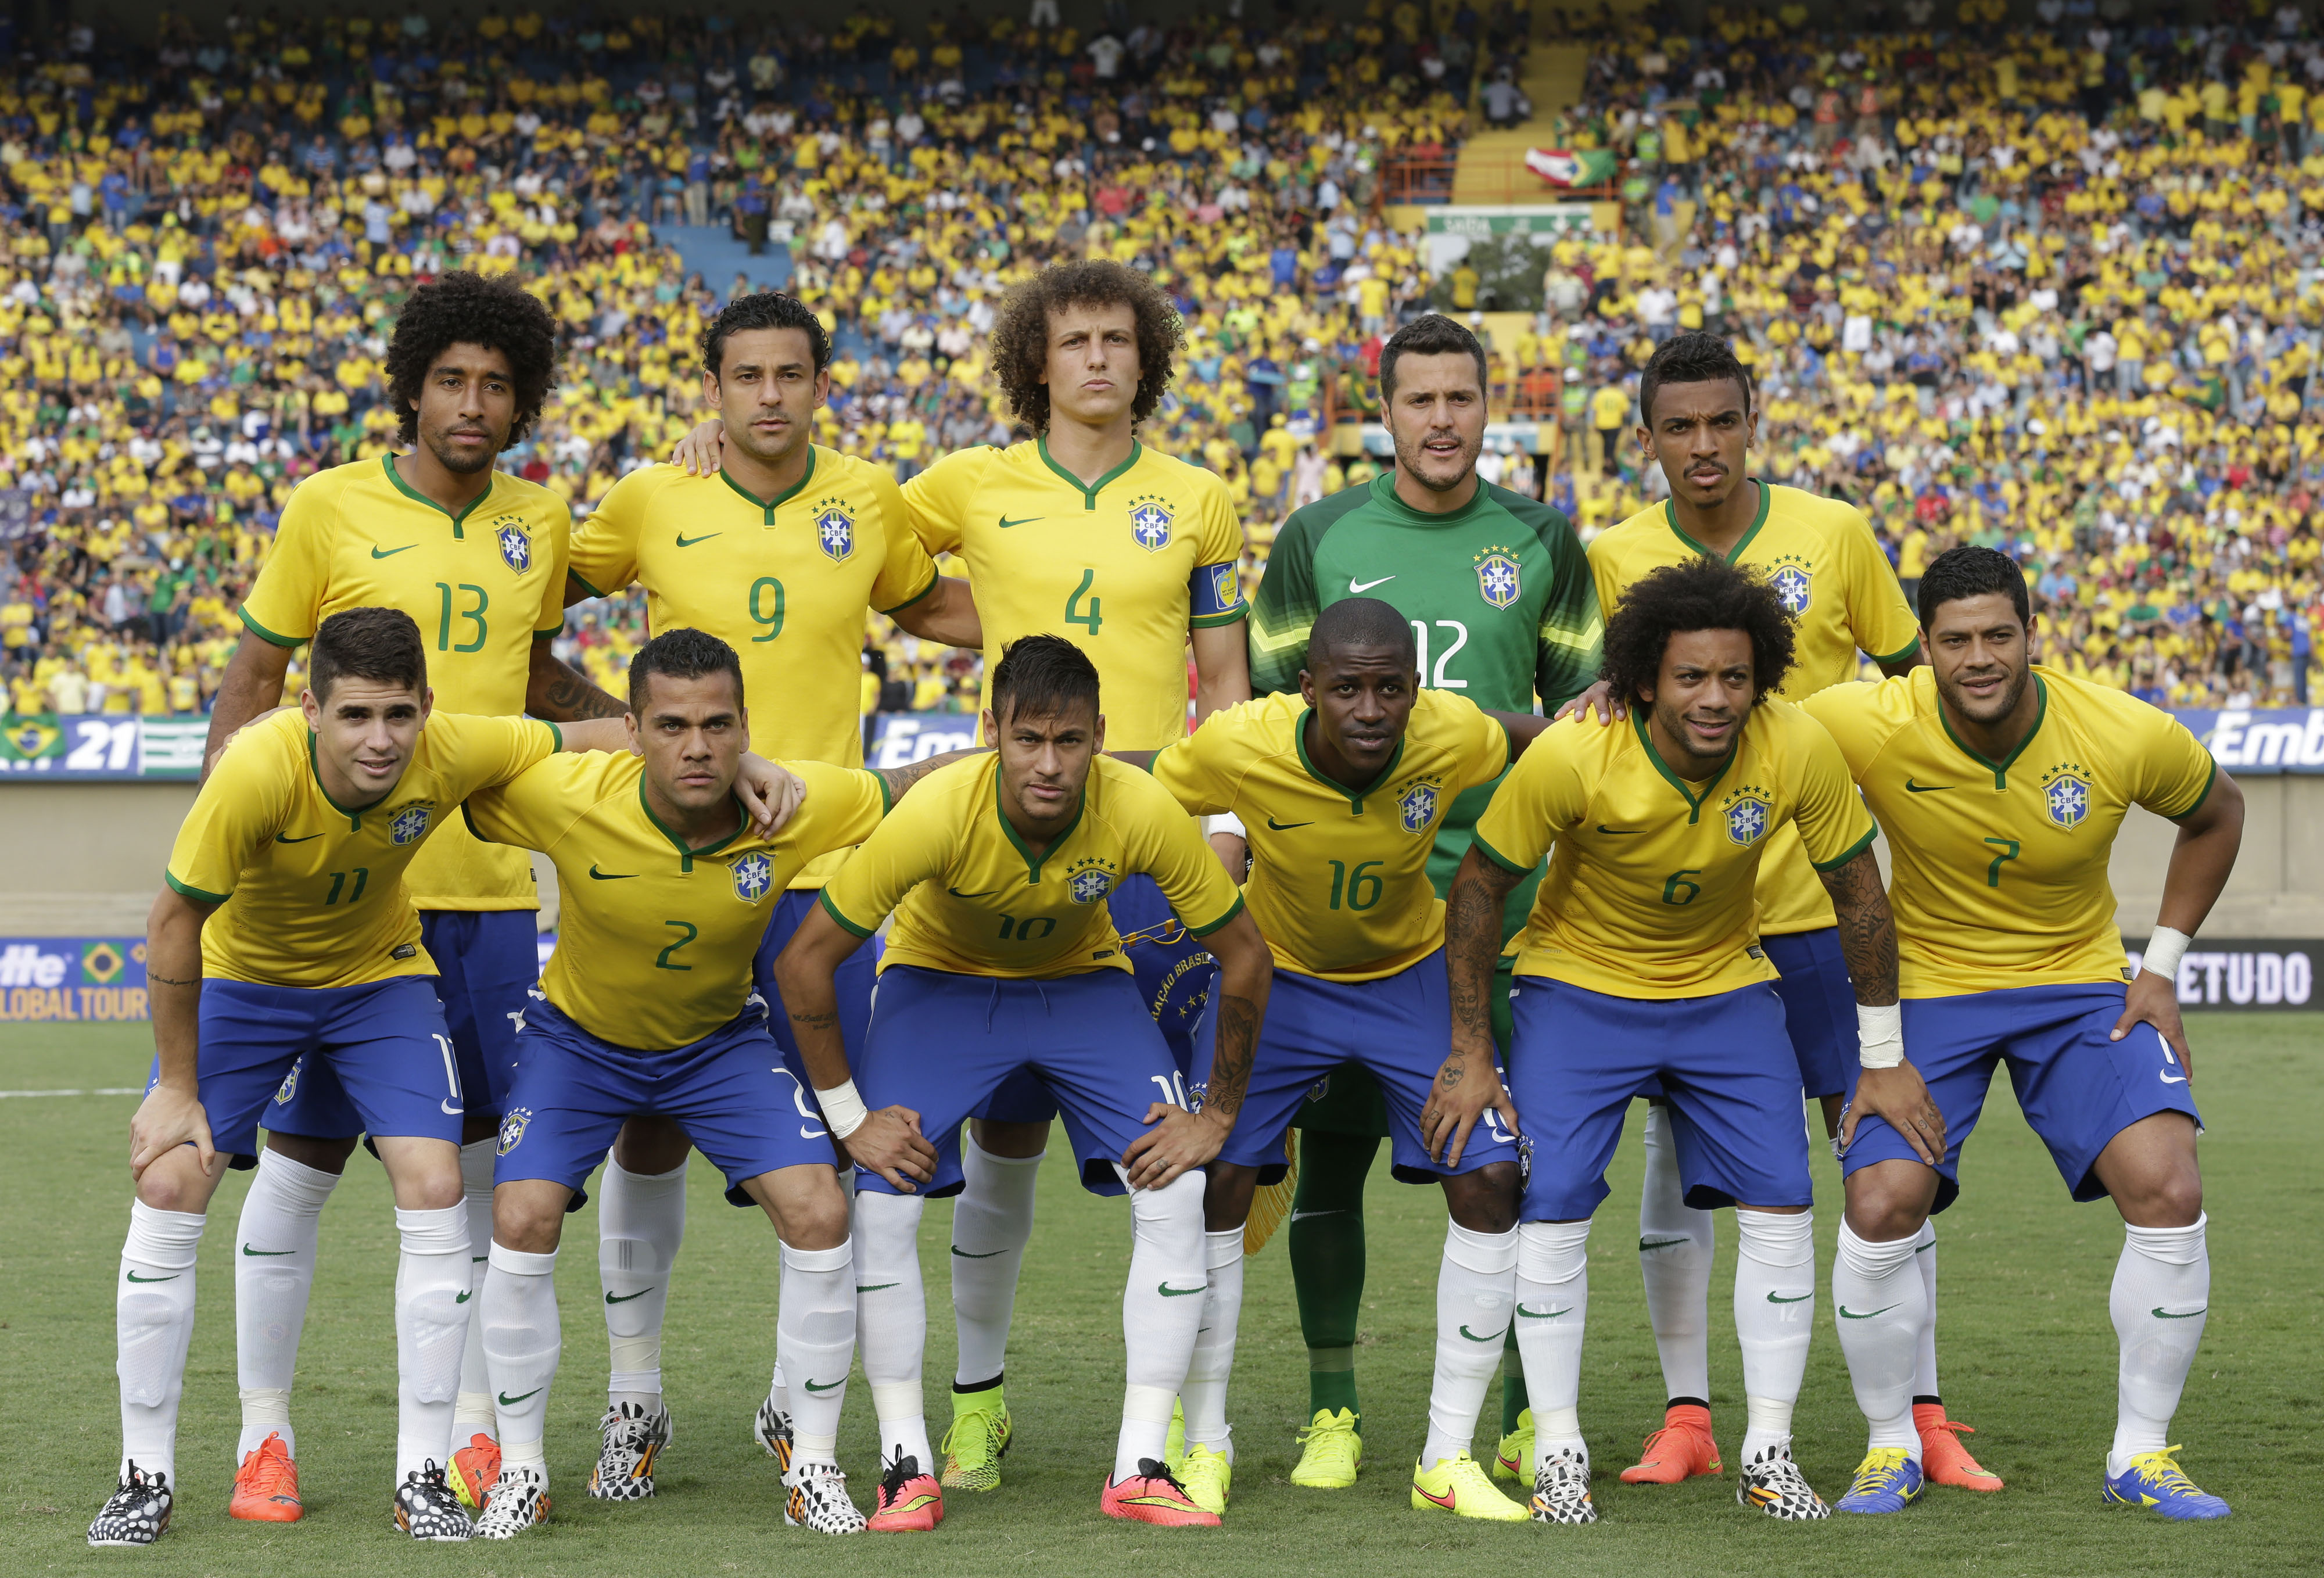 Brazilian national team brings in 13 new players after disastrous World